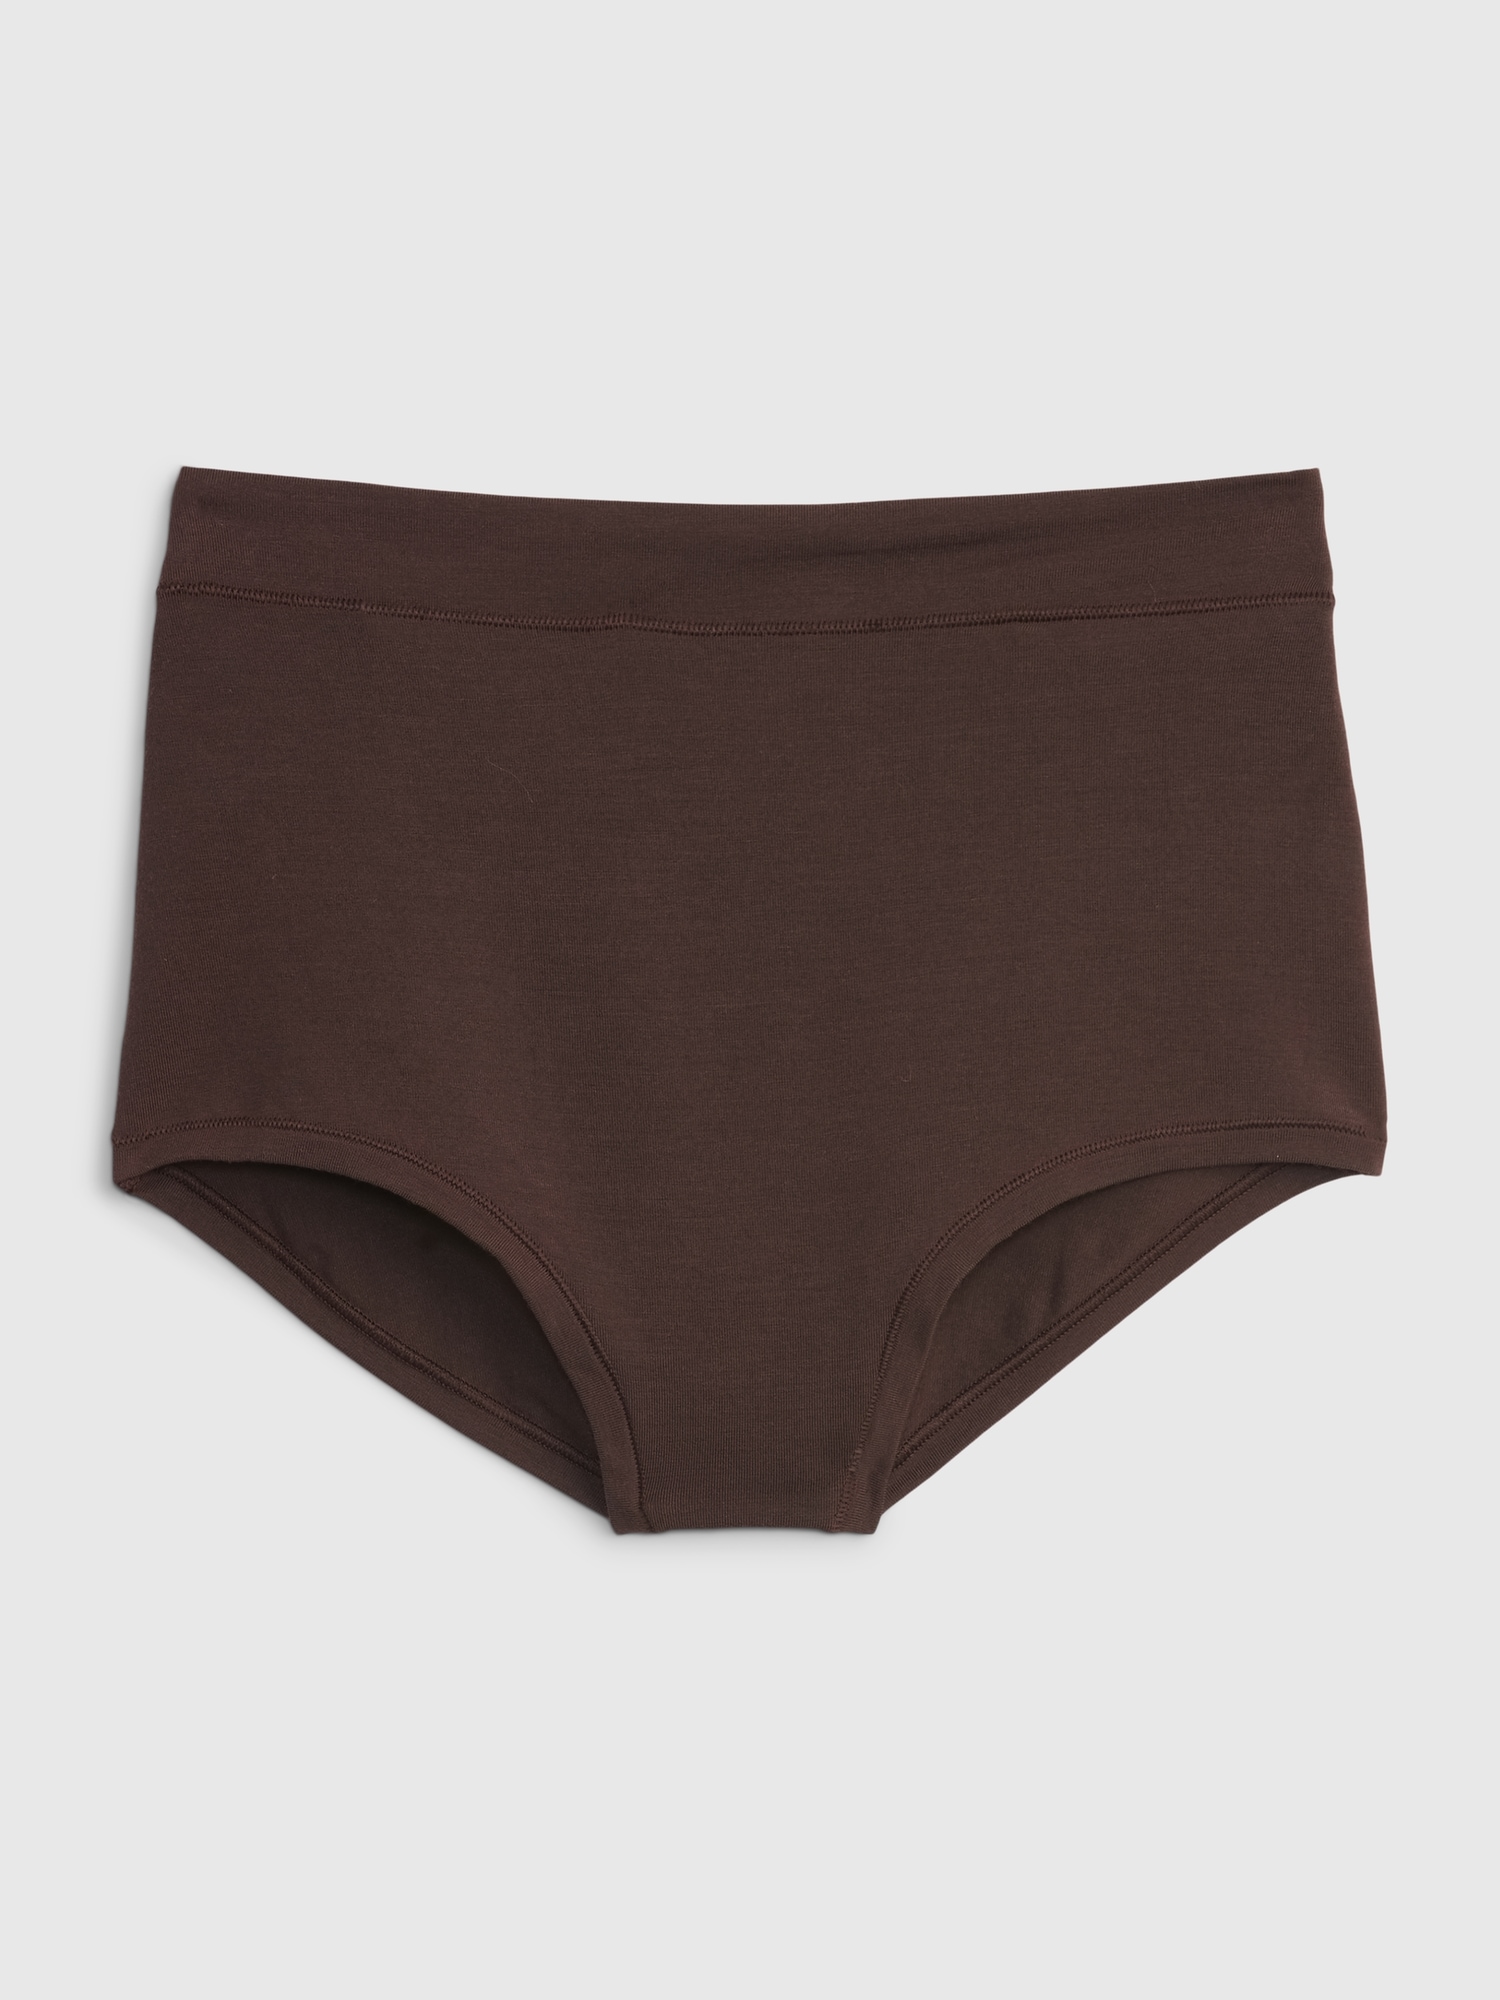 Maternity Briefs - Maternity Knickers, Shorties For Pregnant Women -  vertbaudet